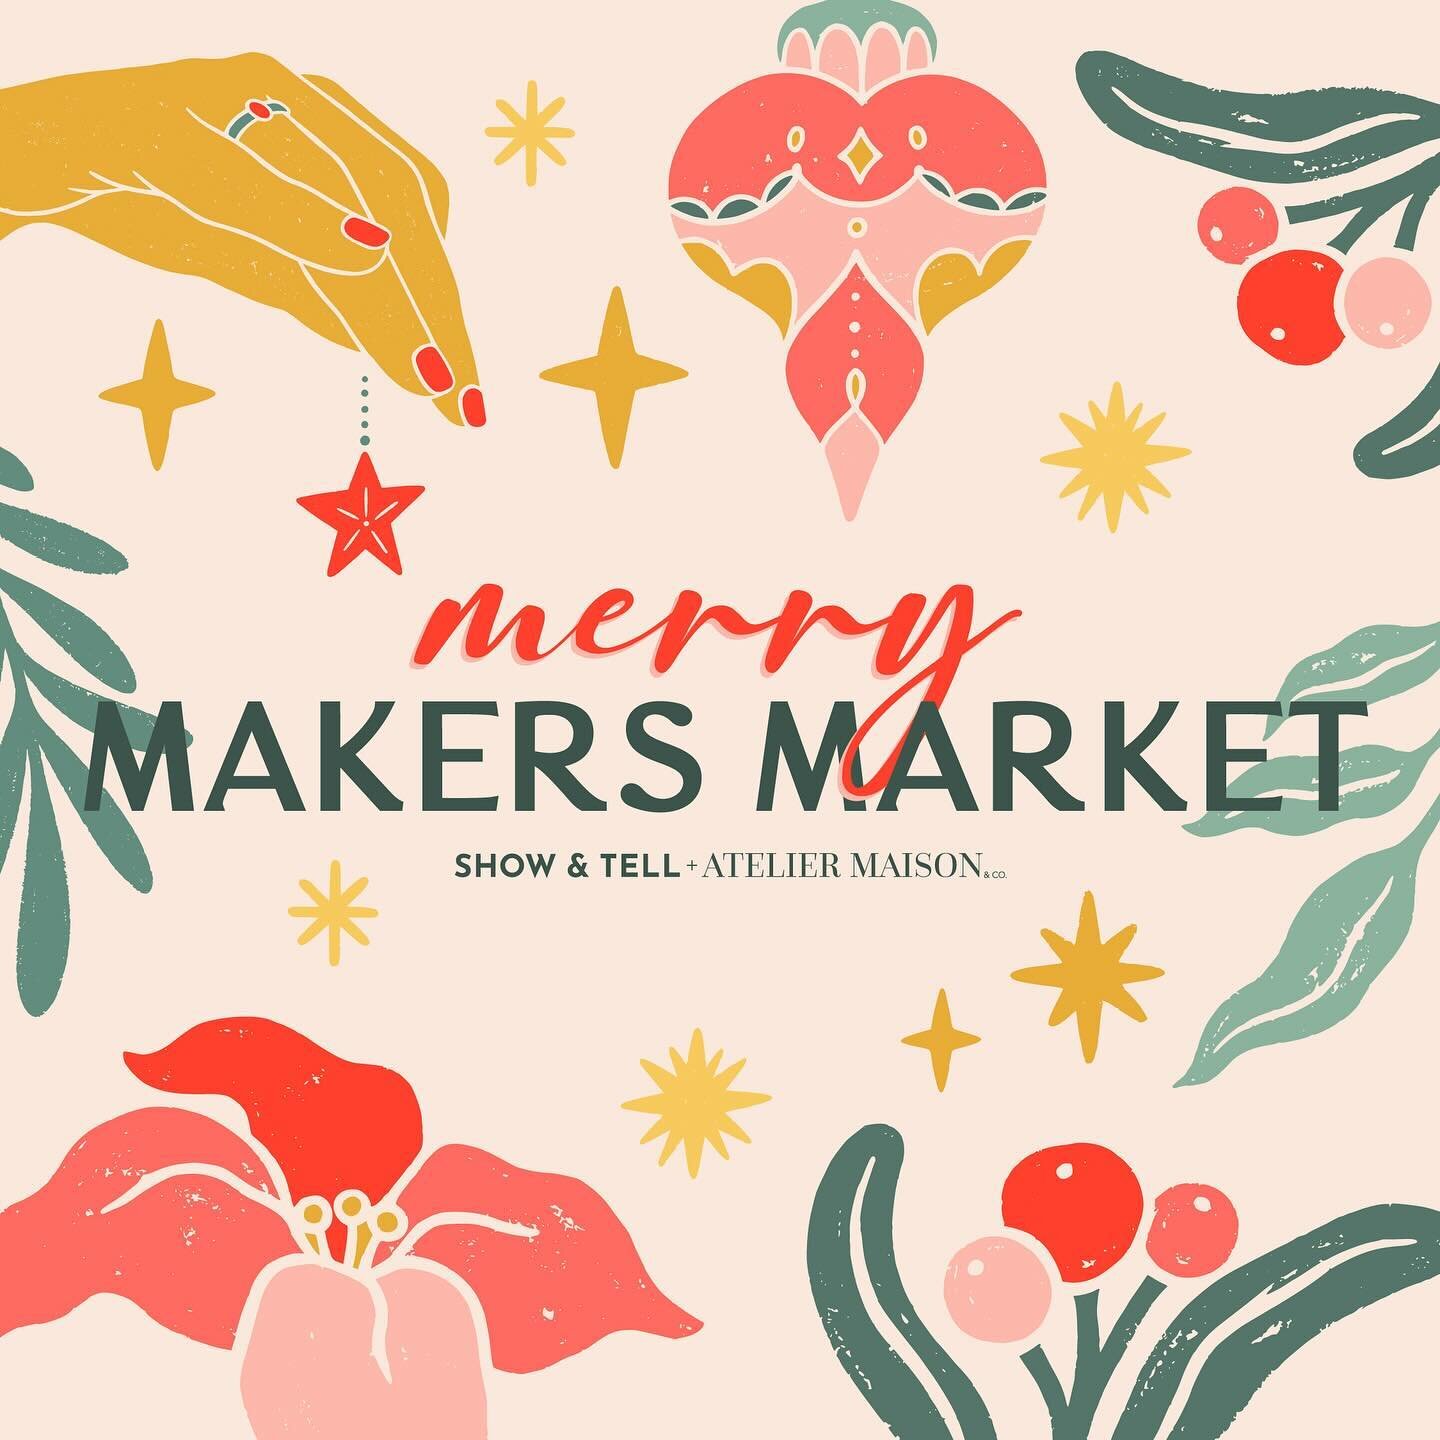 Meet and shop direct from vendors at next weekend&rsquo;s 𝑴𝒆𝒓𝒓𝒚 𝑴𝒂𝒌𝒆𝒓𝒔 𝑴𝒂𝒓𝒌𝒆𝒕! Shop a fabulous selection from small and local makers and collectors featuring handmade jewelry, vintage home decor, forged knives, hand poured candles, d